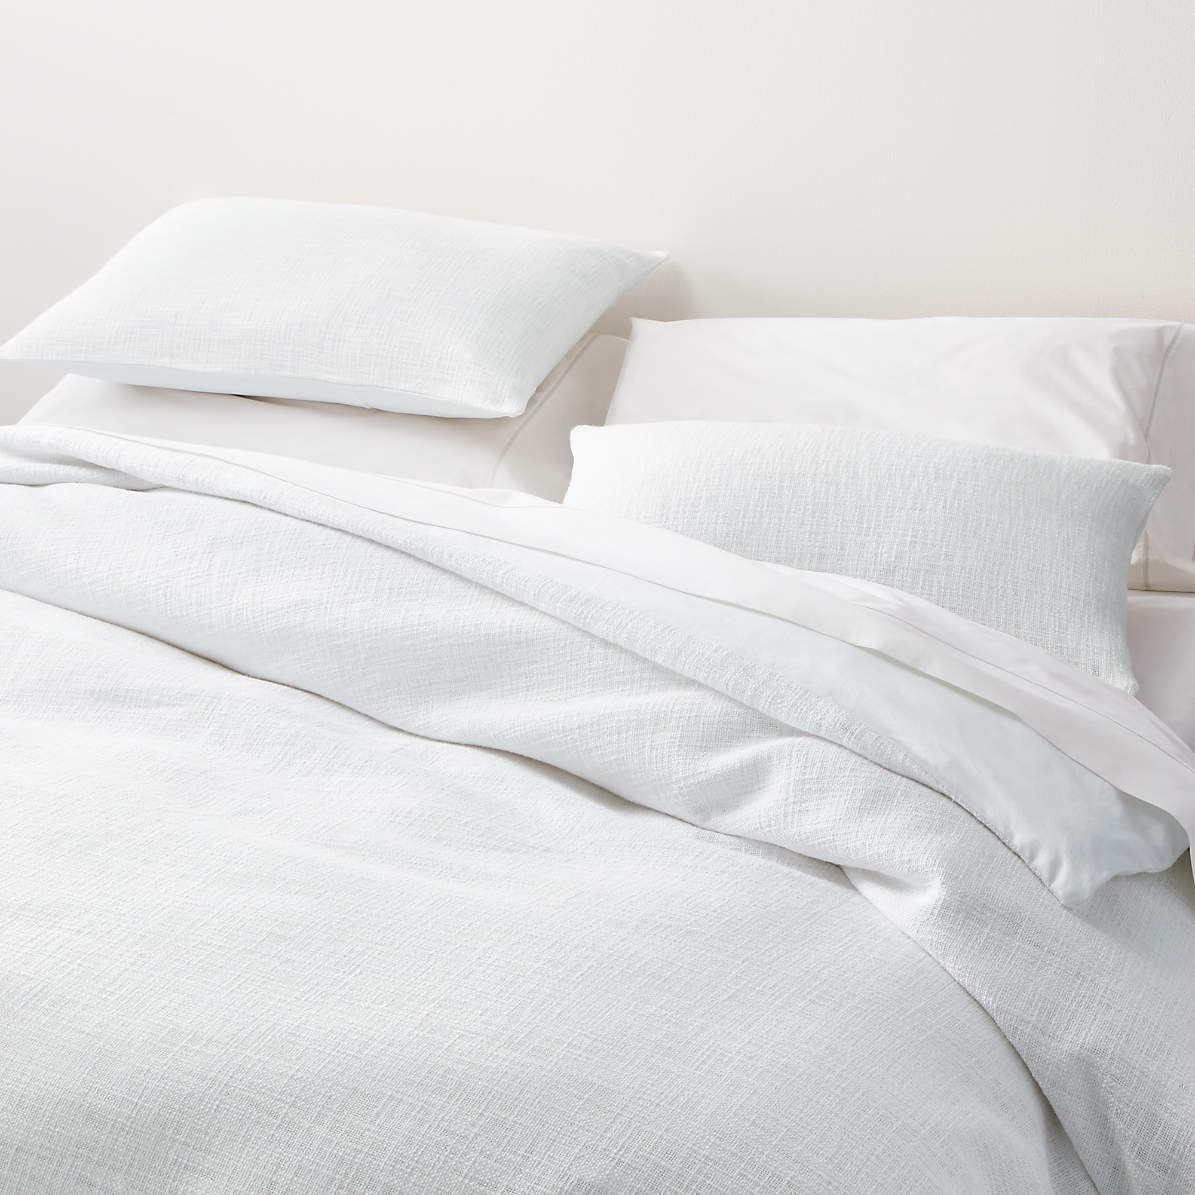 Lindstrom White Duvet Covers And Pillow, Crate And Barrel Duvet Covers